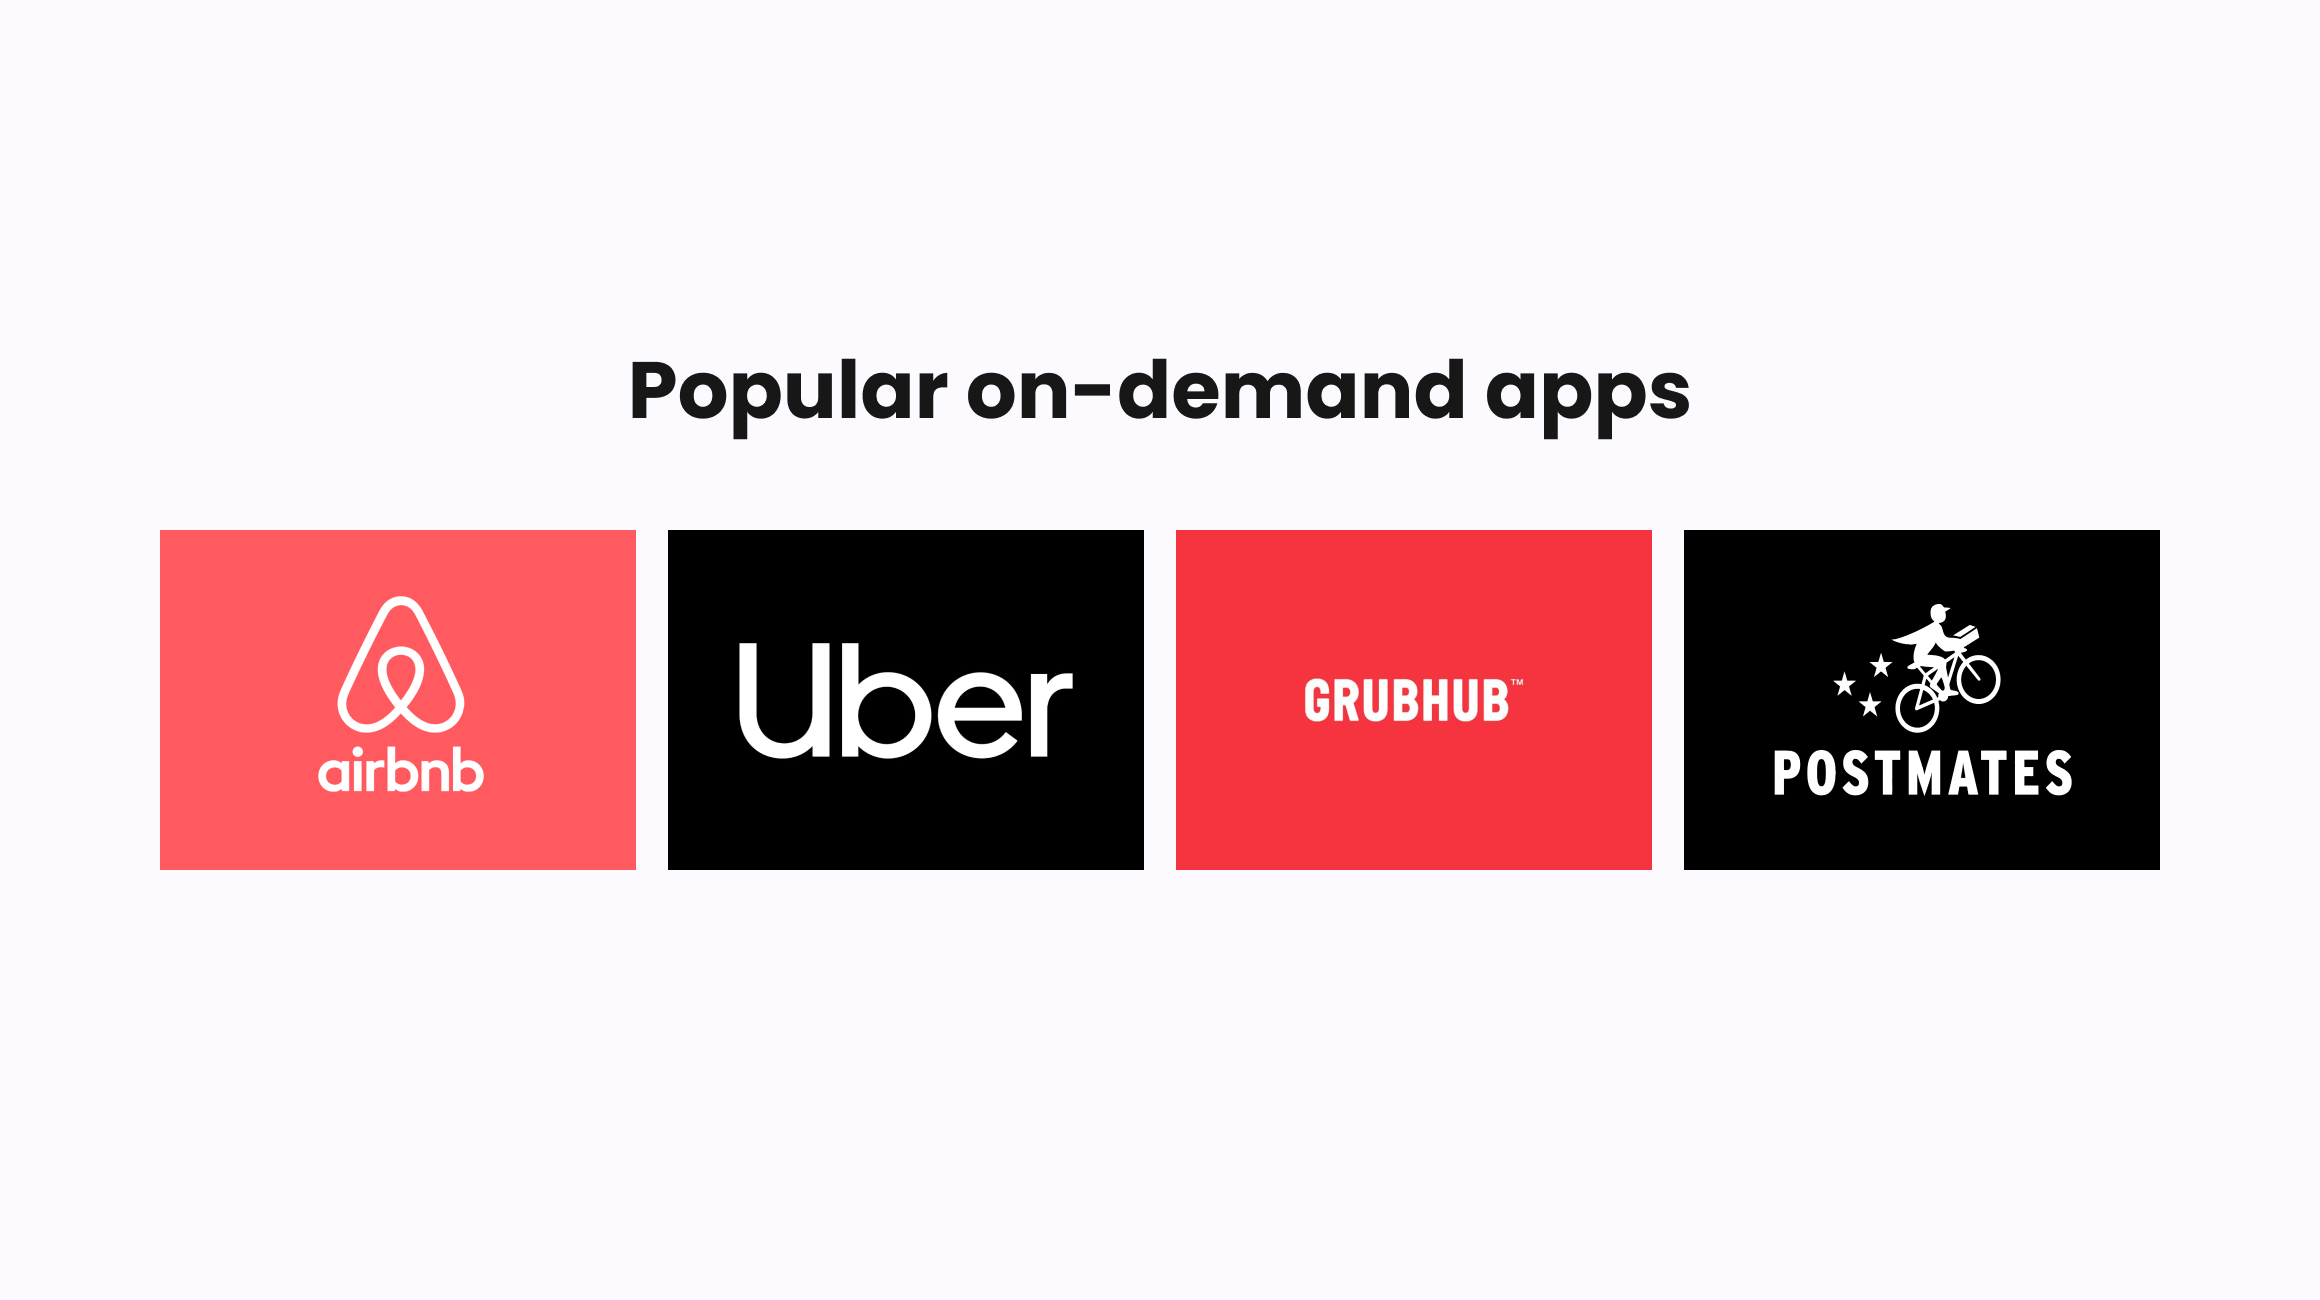 Examples of popular on-demand apps